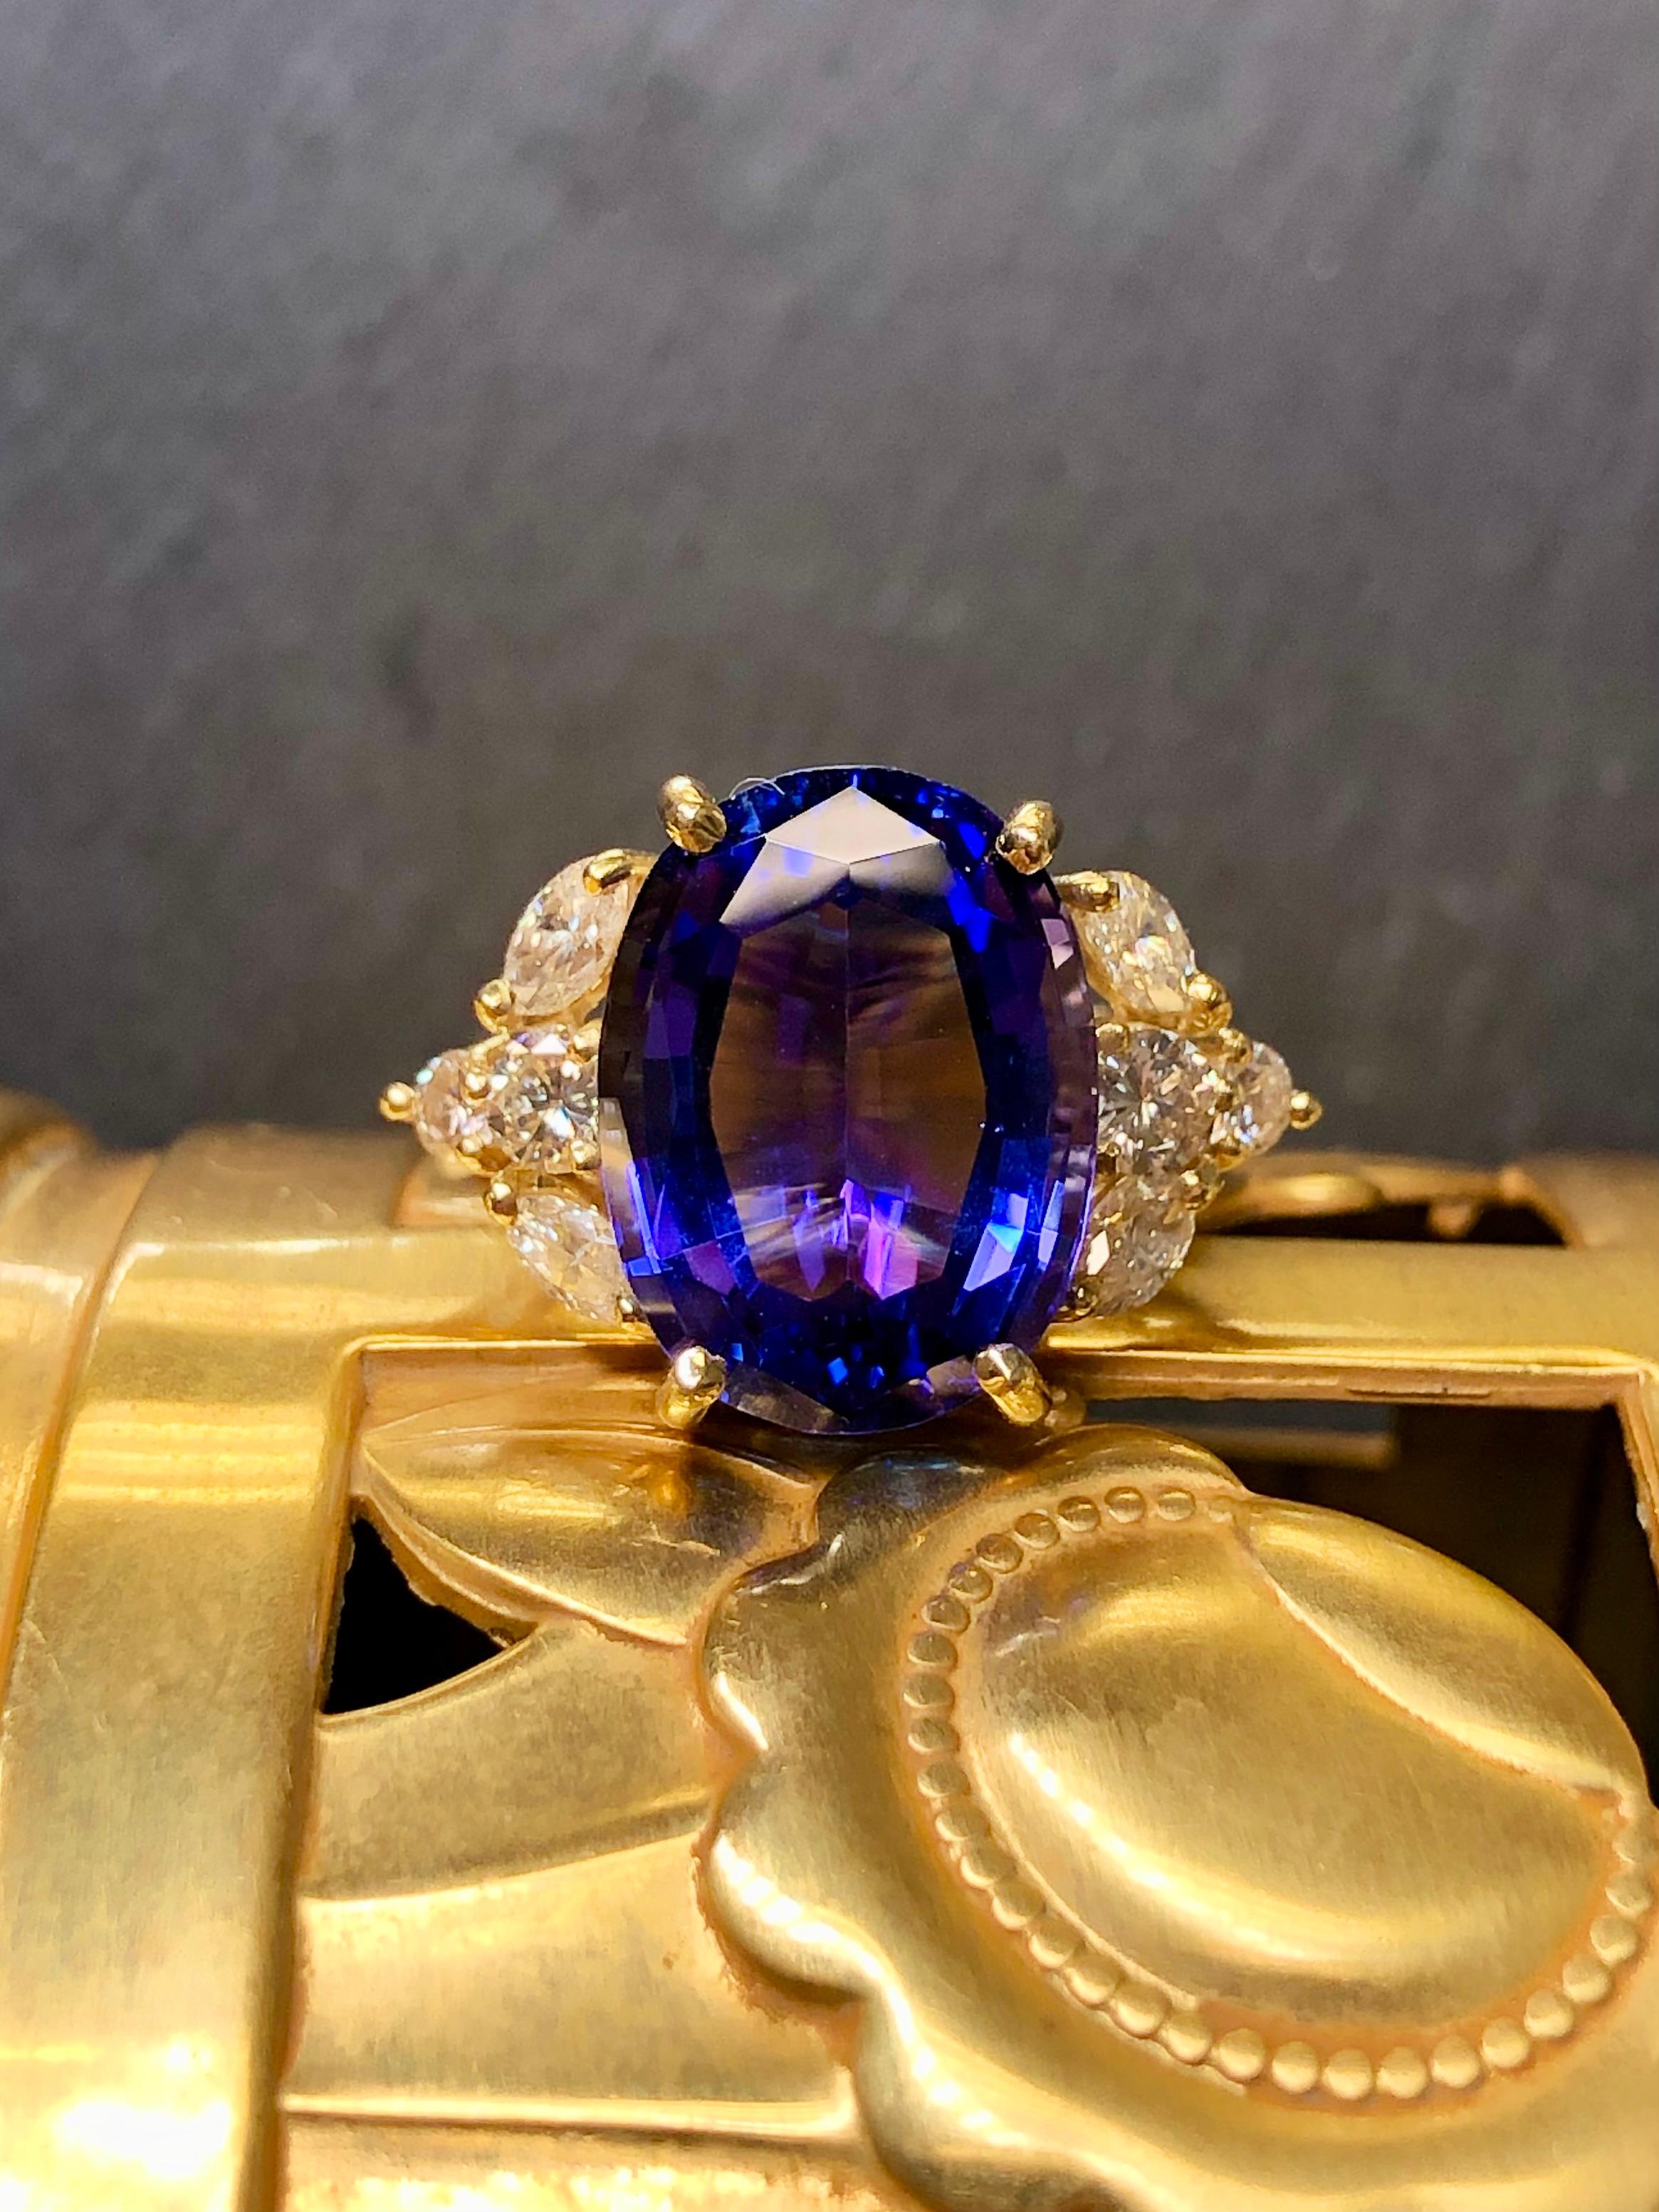 
A classic vintage cocktail ring done in 18K yellow gold centered with an approximately 7.50ct oval tanzanite exhibiting a beautiful violet blue hue. Flanking the center stone are larger marquise and round diamonds being H-J color and Vs1-2 clarity